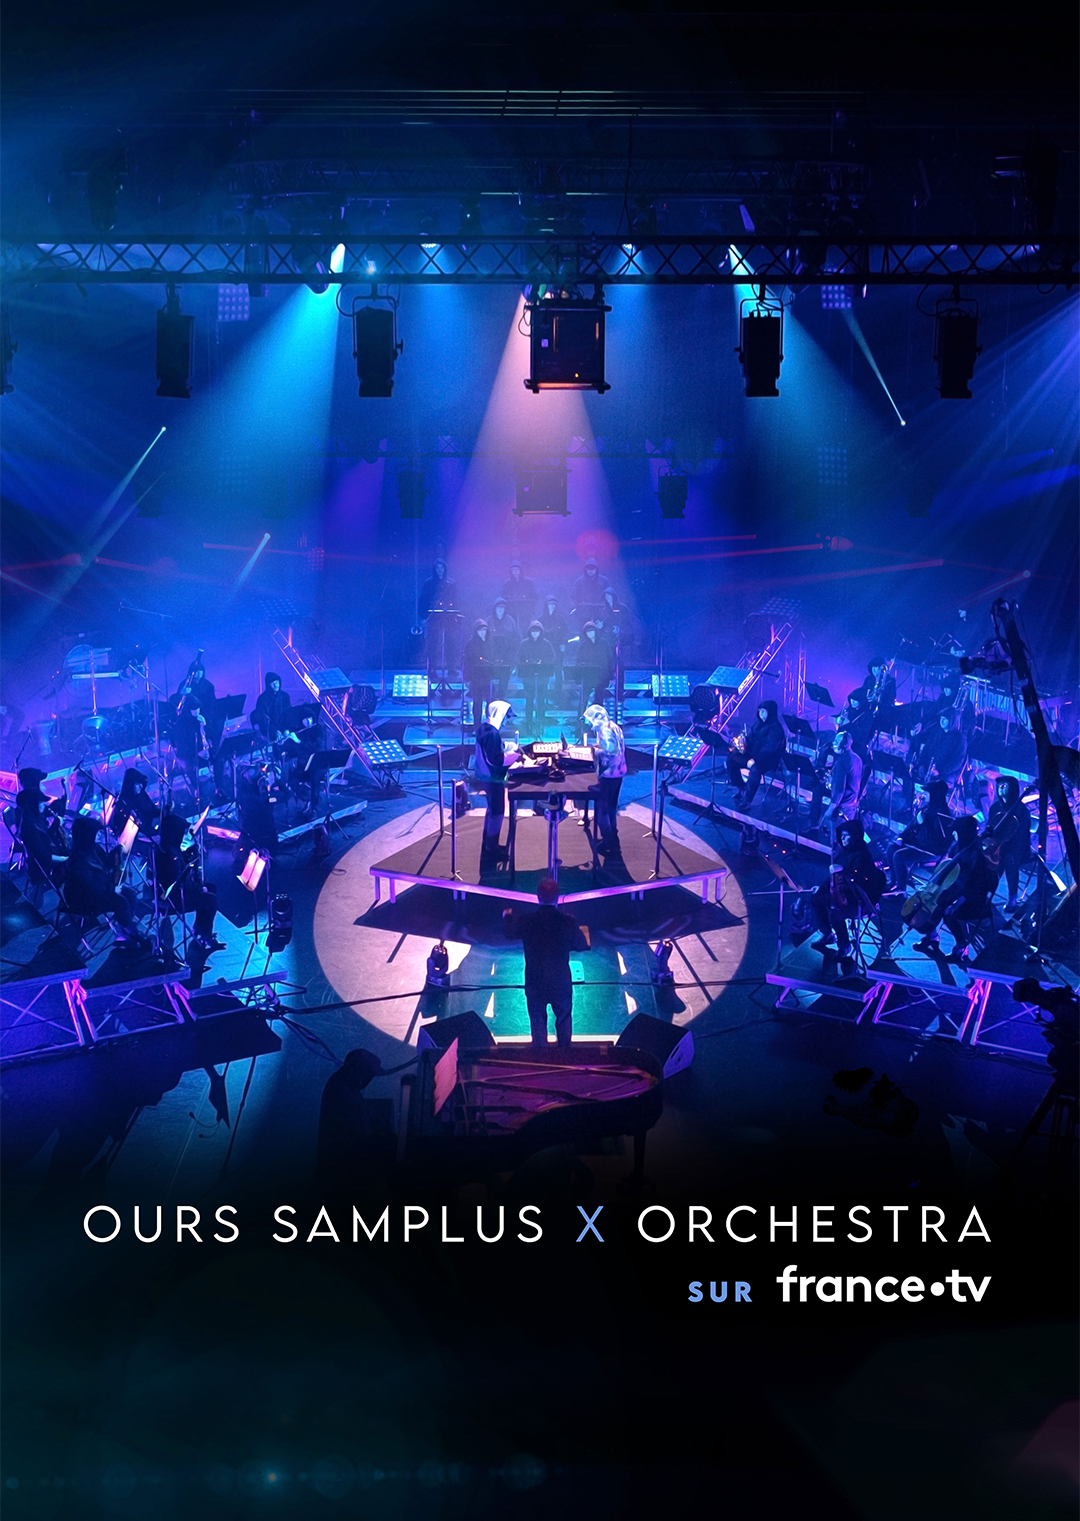 Ours Samplus x Orchestra ©BroadwayProduction